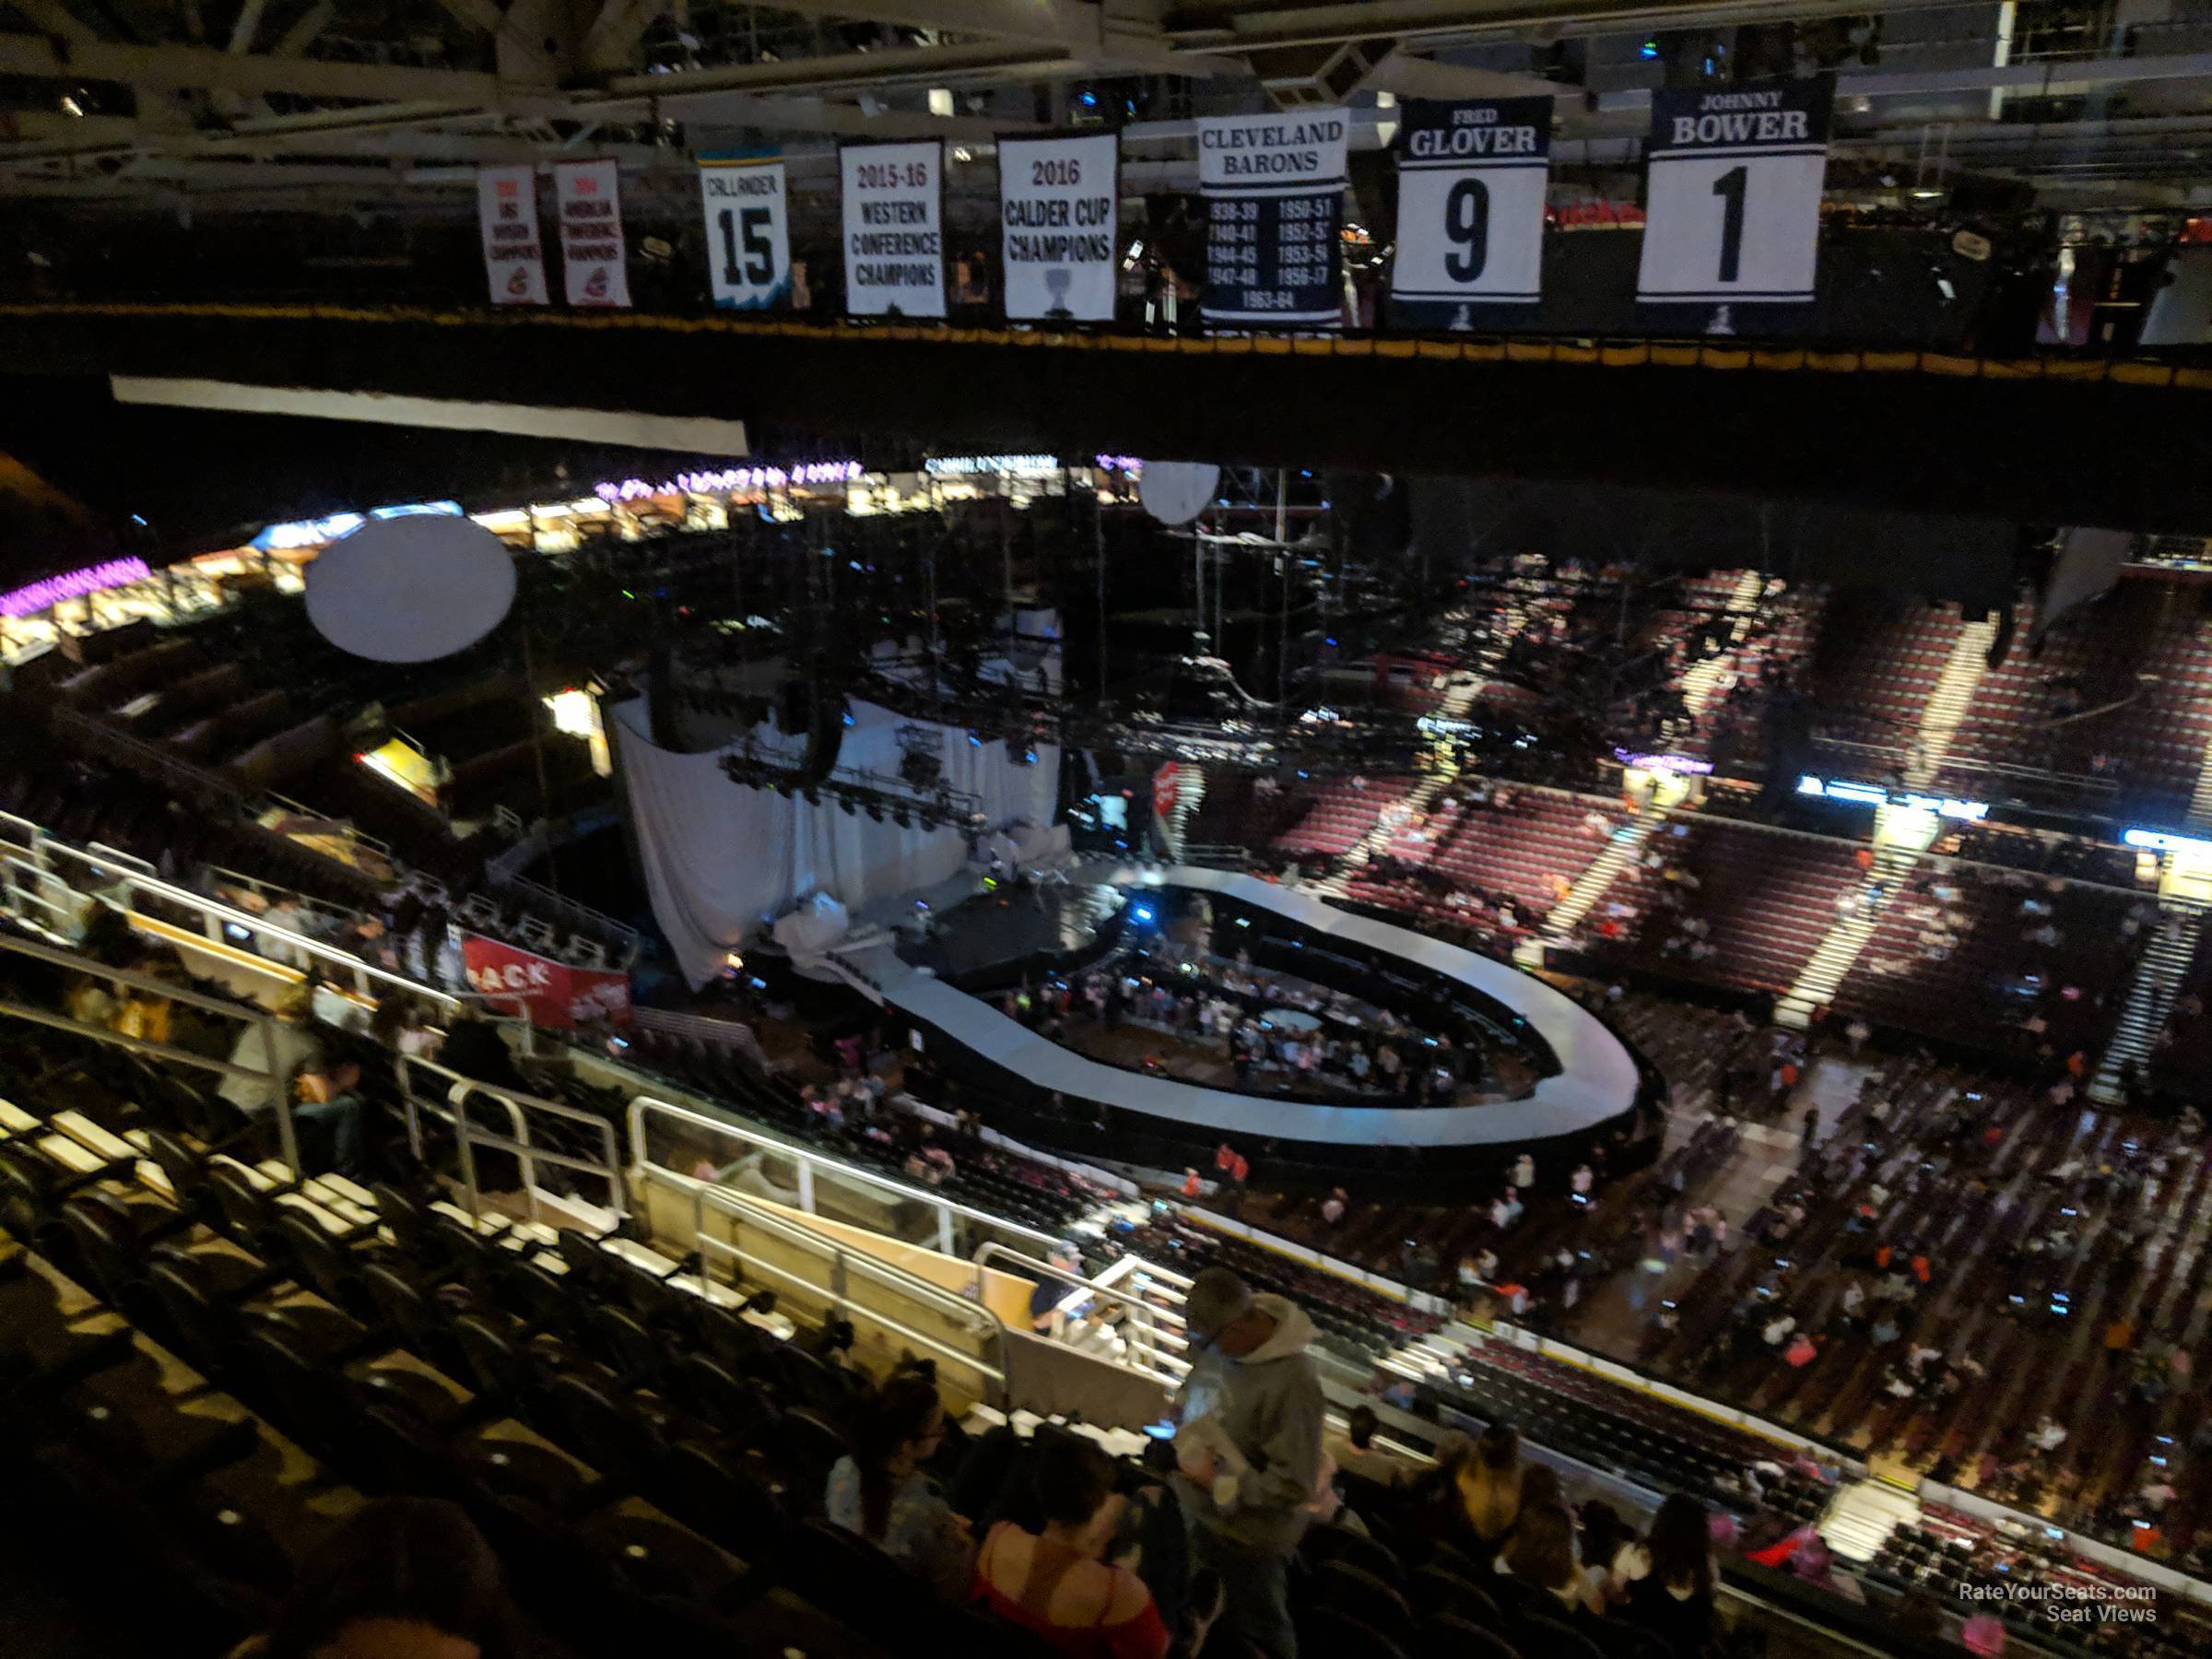 section 208, row 15 seat view  for concert - rocket mortgage fieldhouse